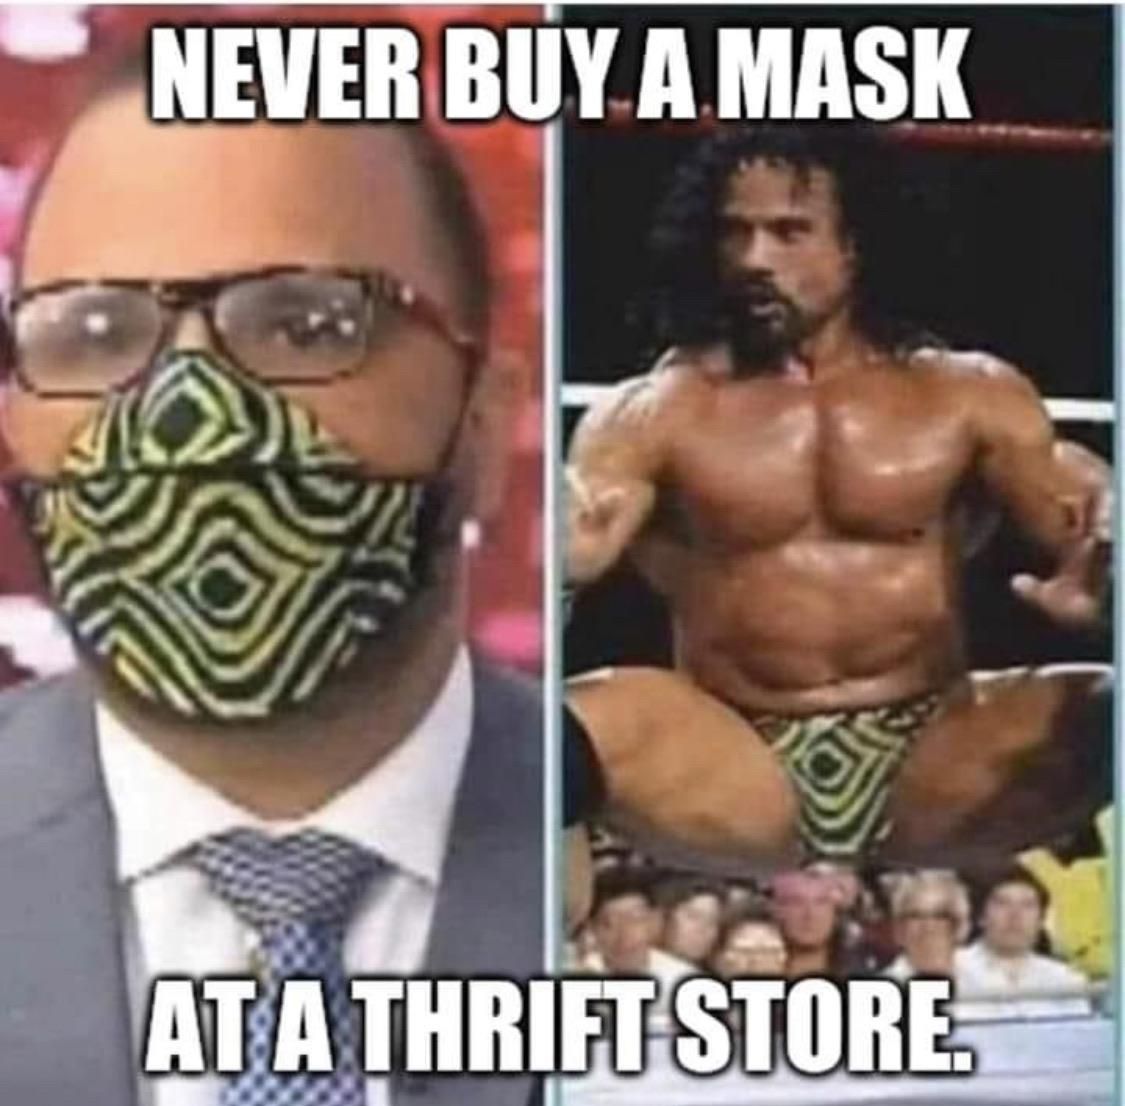 Don’t get your mask from a thrift store.